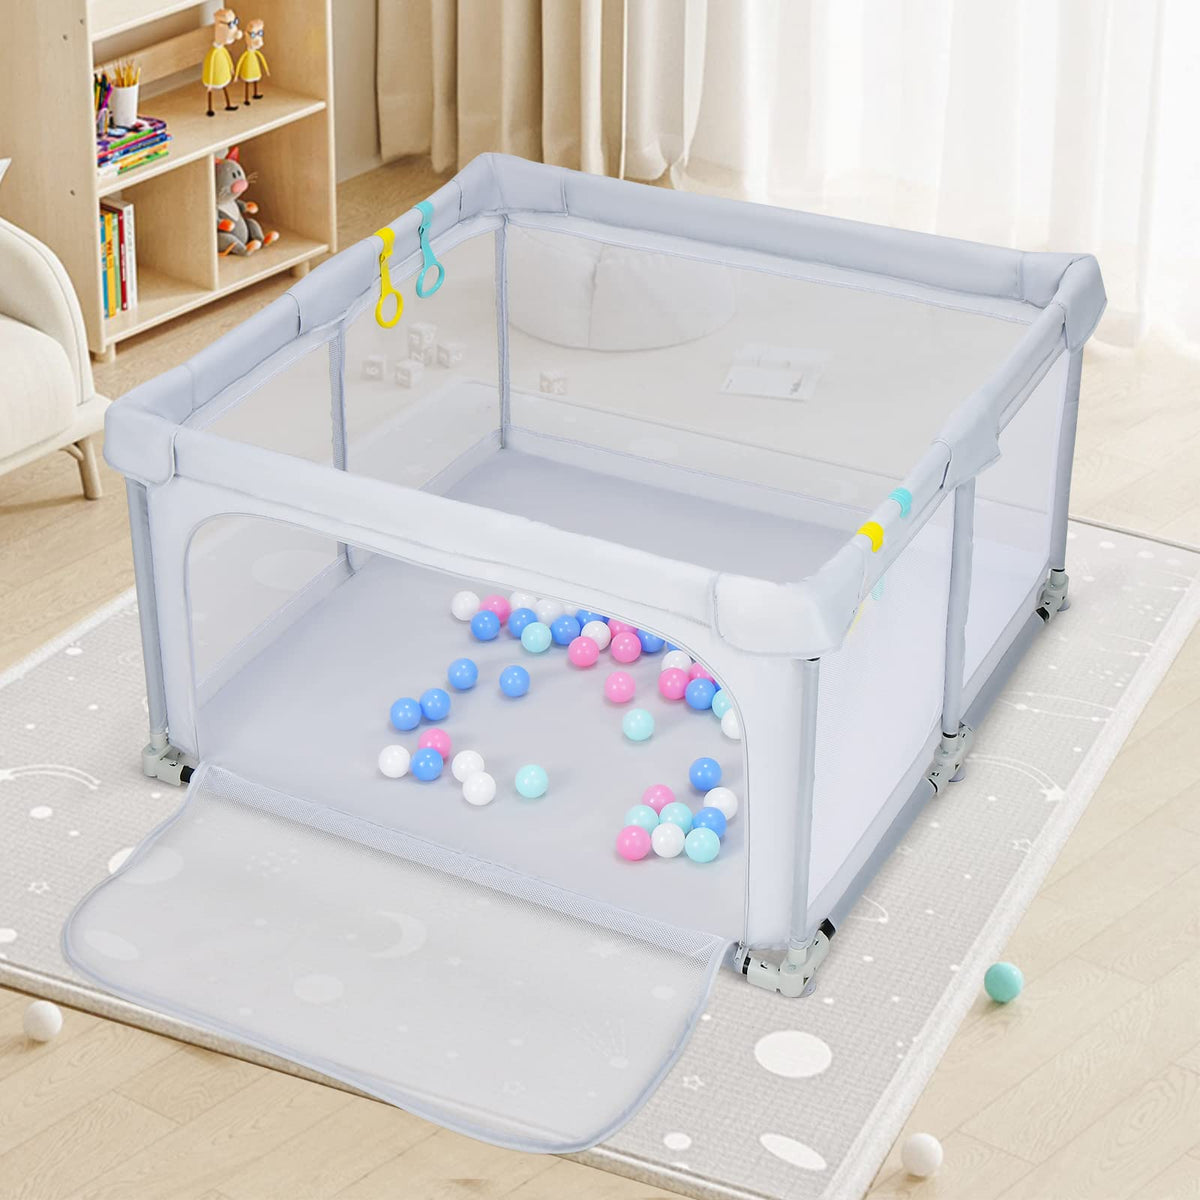 Foldable Baby Playpen, Playpen Activity Center for Babies Toddlers w/50 Balls & 4 Pull Rings